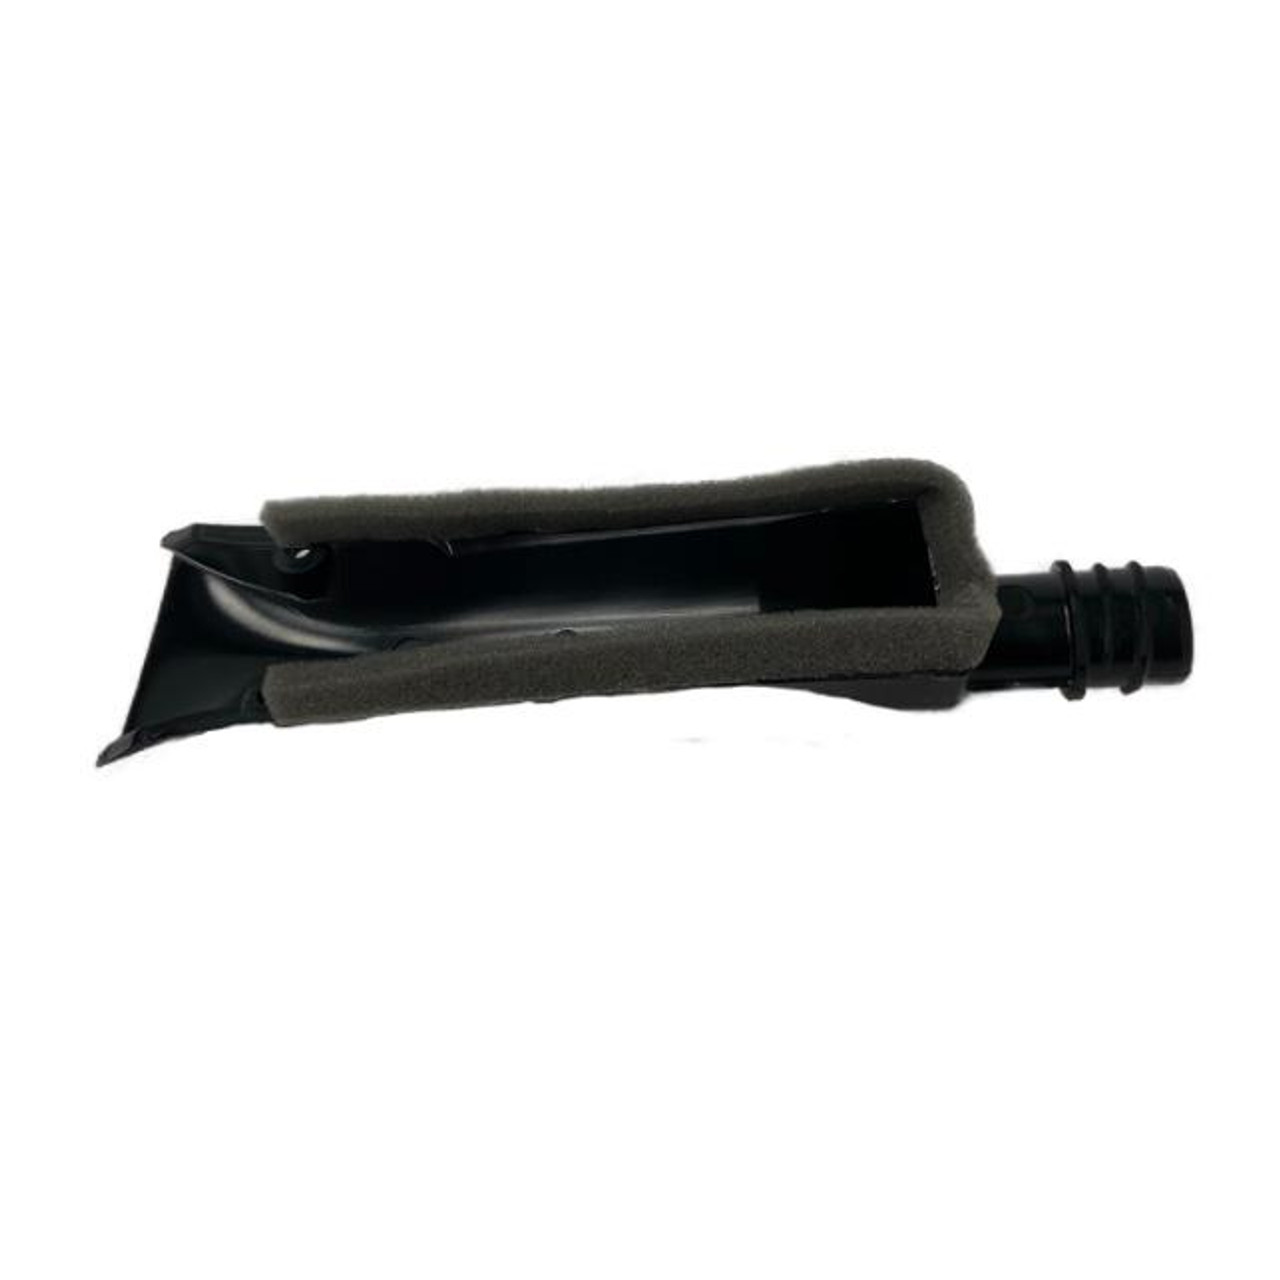 Vac Attachment for Oster Clippers - Plastic